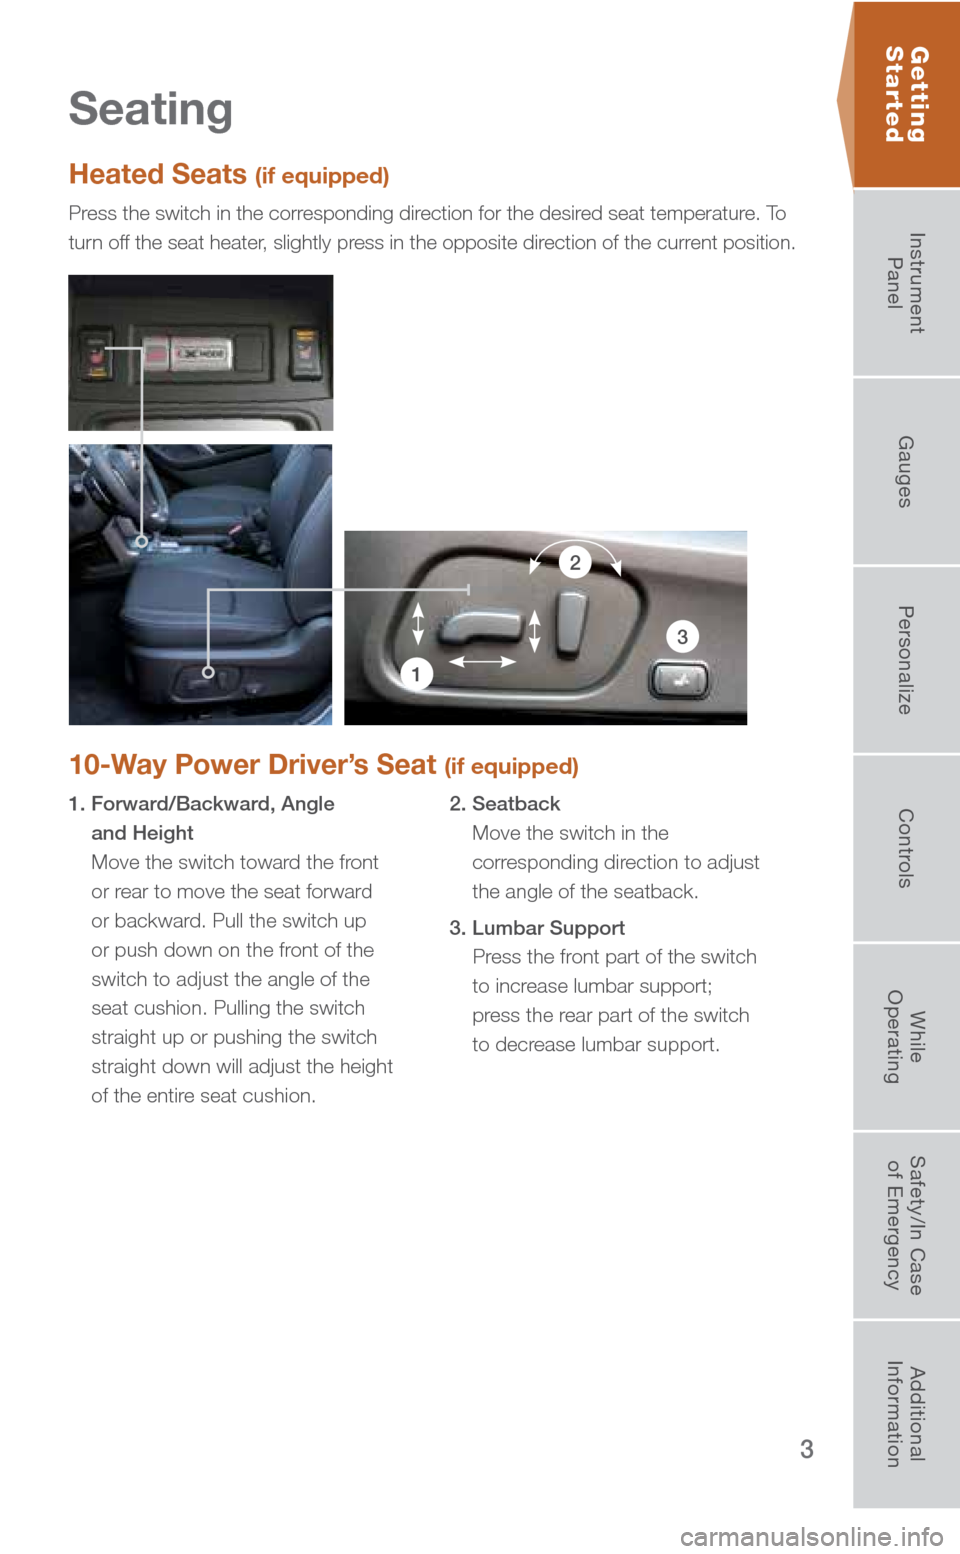 SUBARU FORESTER 2016 SJ / 4.G Quick Reference Guide 3
Seating
10-Way Power Driver’s Seat (if equipped)
1. Forward/Backward, Angle  and Height 
  Move the switch toward the front 
or rear to move the seat forward 
or backward. Pull the switch up 
or p